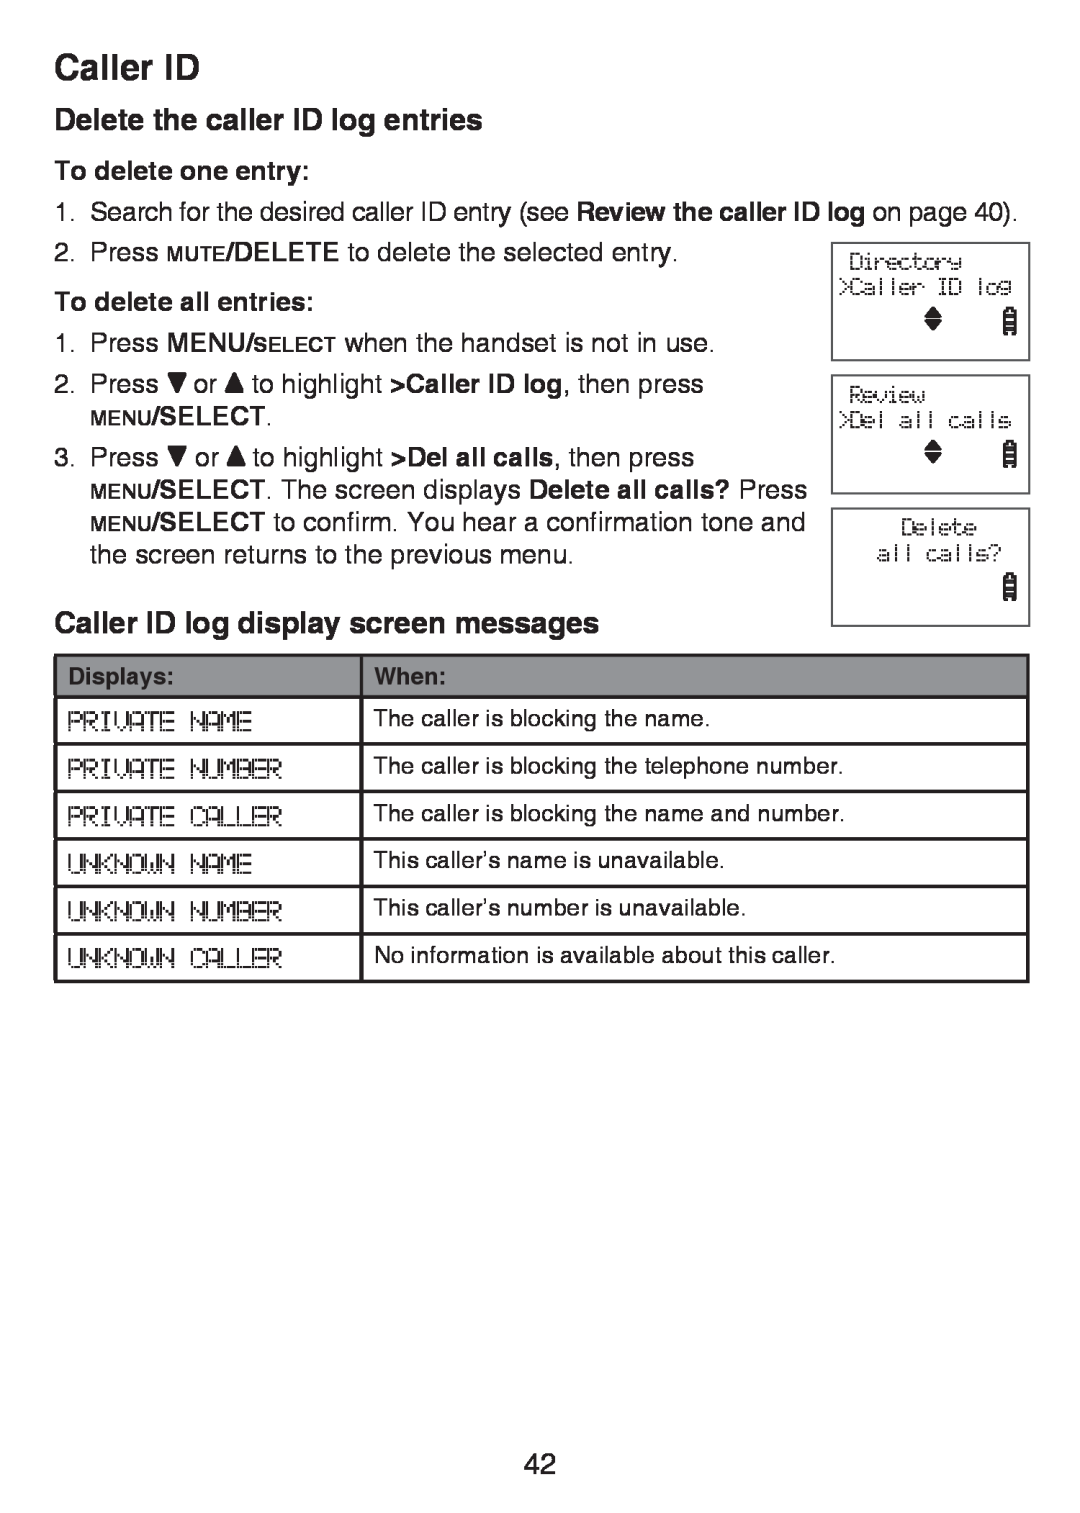 VTech LS6426-4 Delete the caller ID log entries, Caller ID log display screen messages, To delete one entry, Menu/Select 